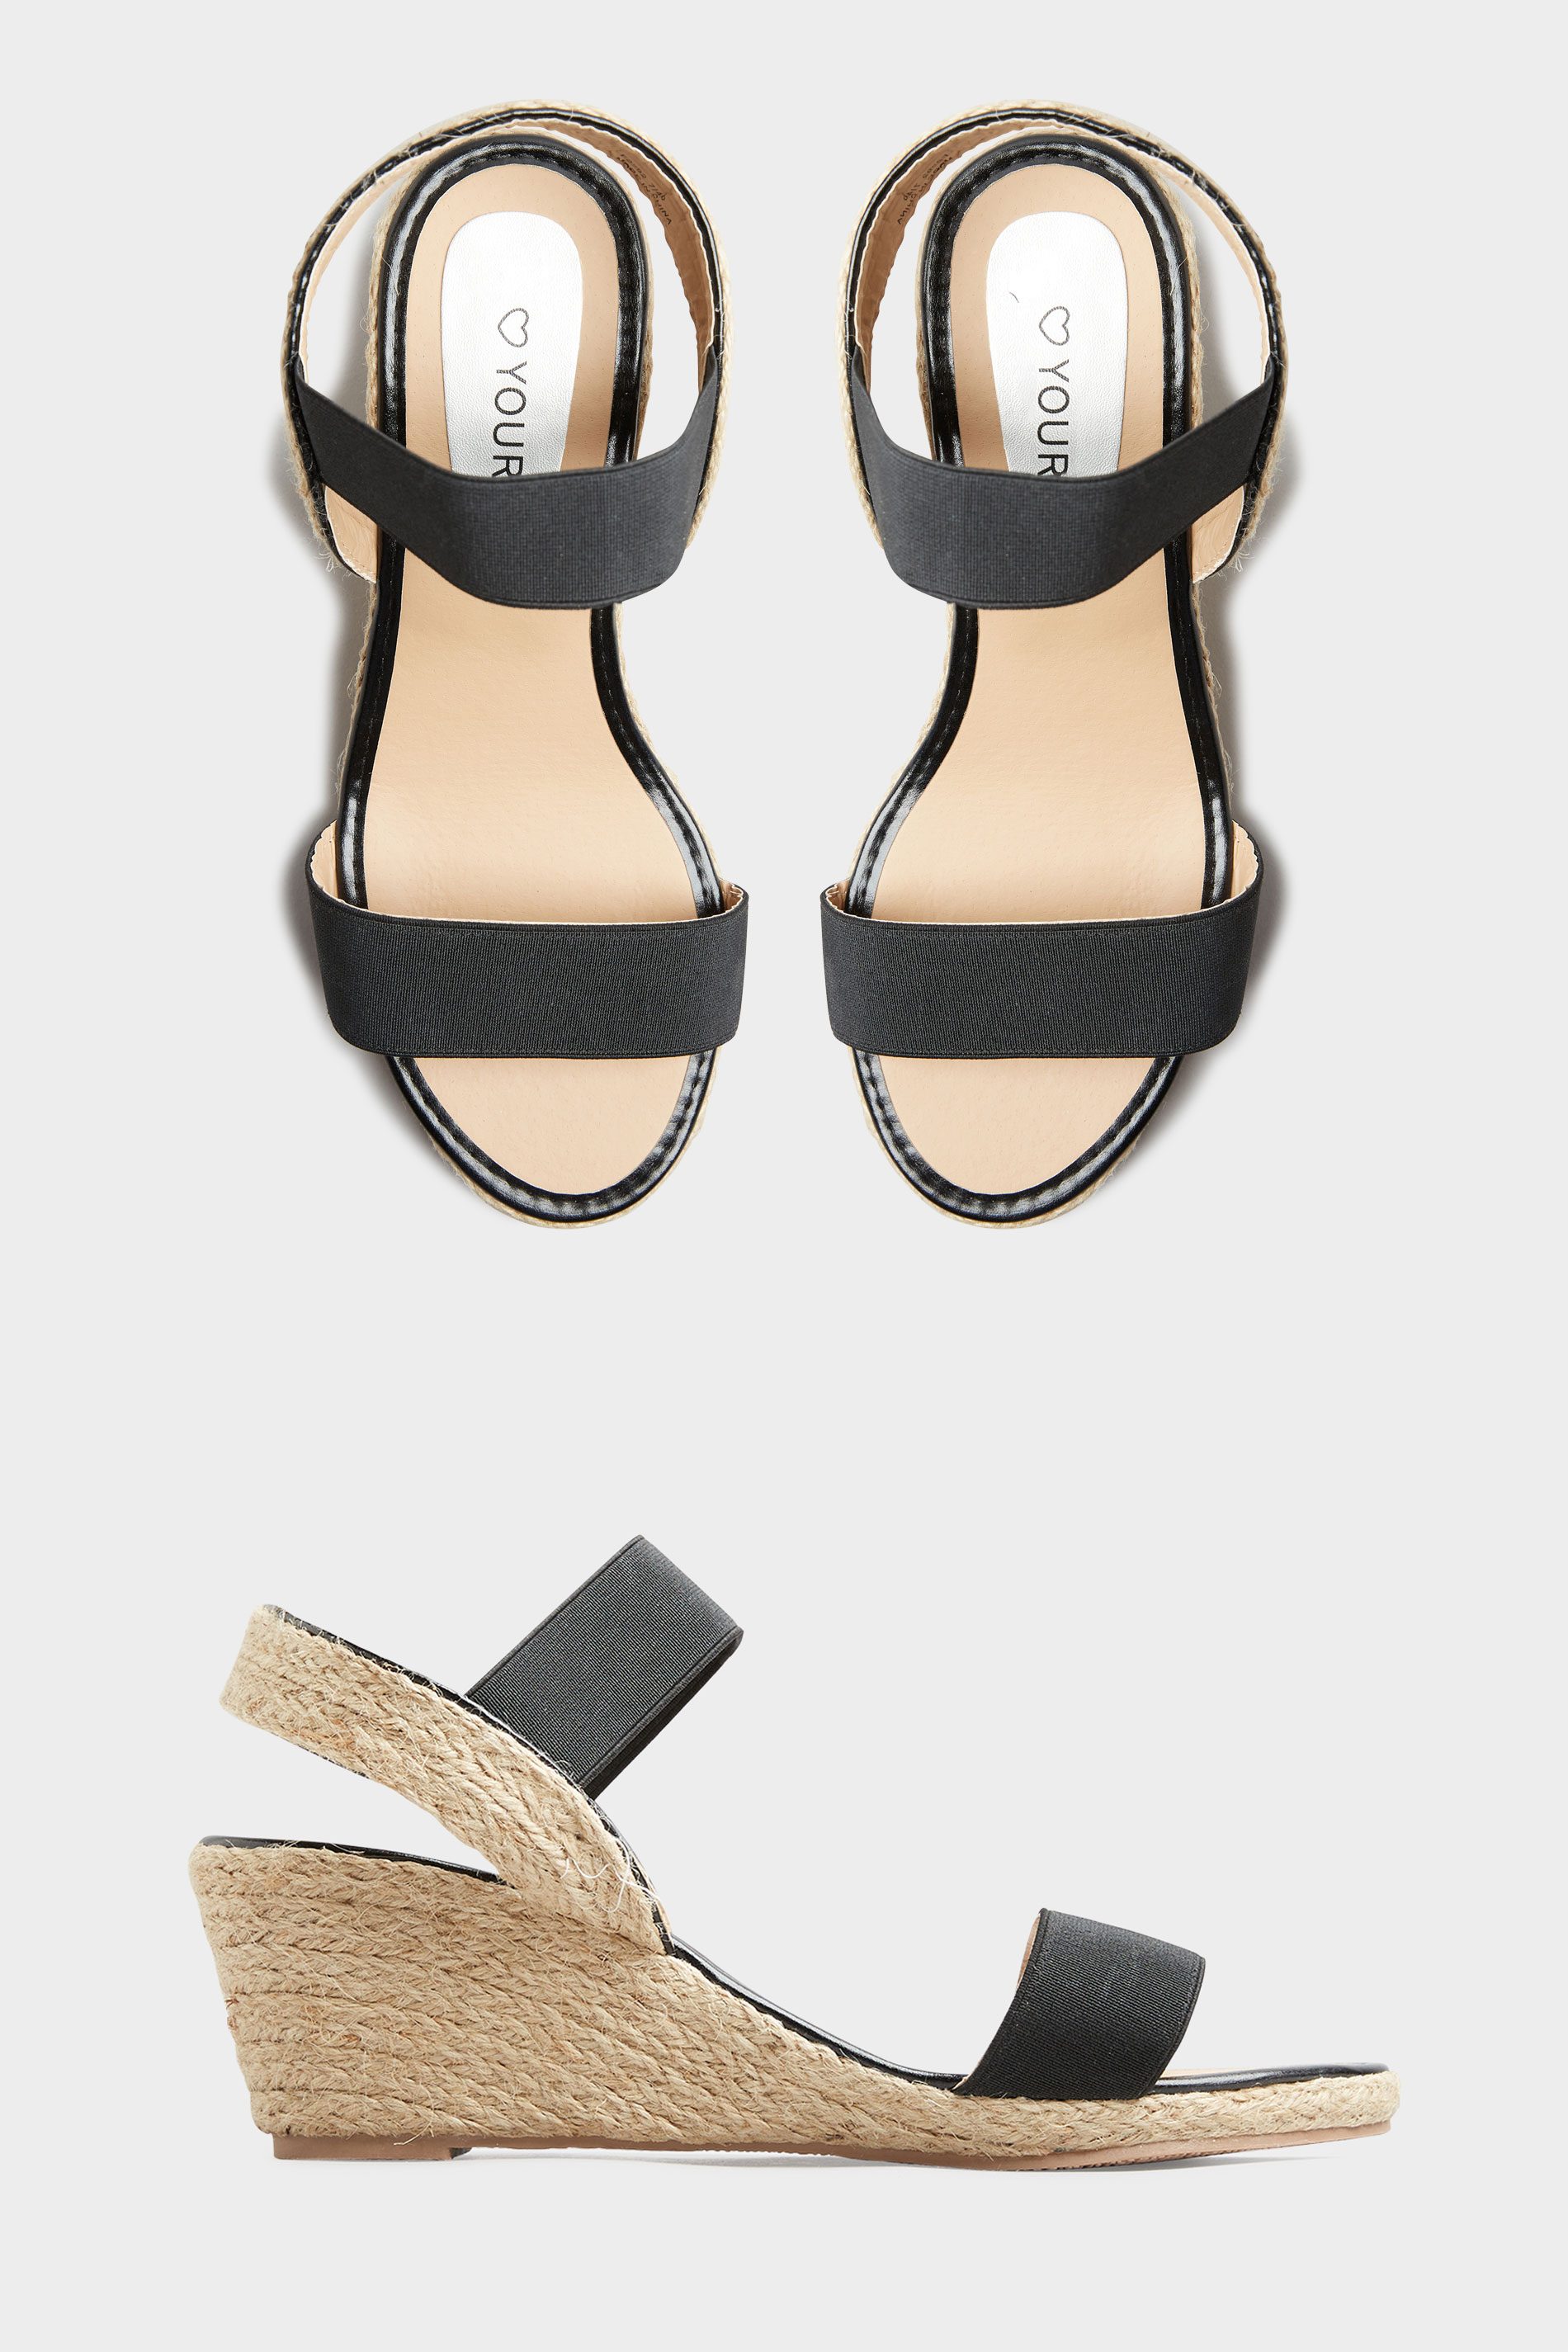 Black Espadrille Wedge Sandals In Extra Wide EEE Fit | Long Tall Sally